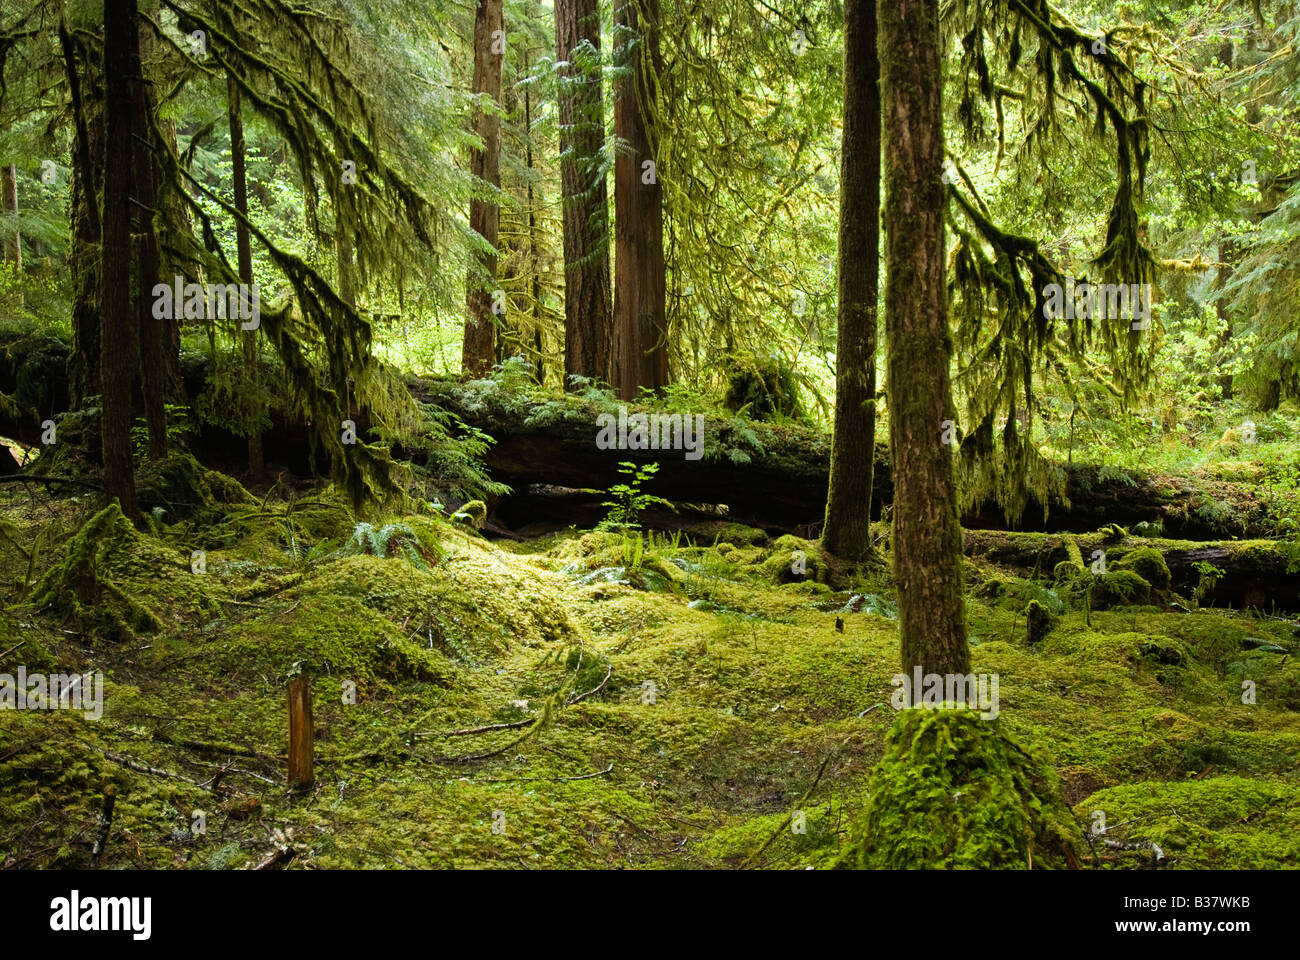 The mossy forest floor in Ancient Groves Olympic National Park Washington Stock Photo